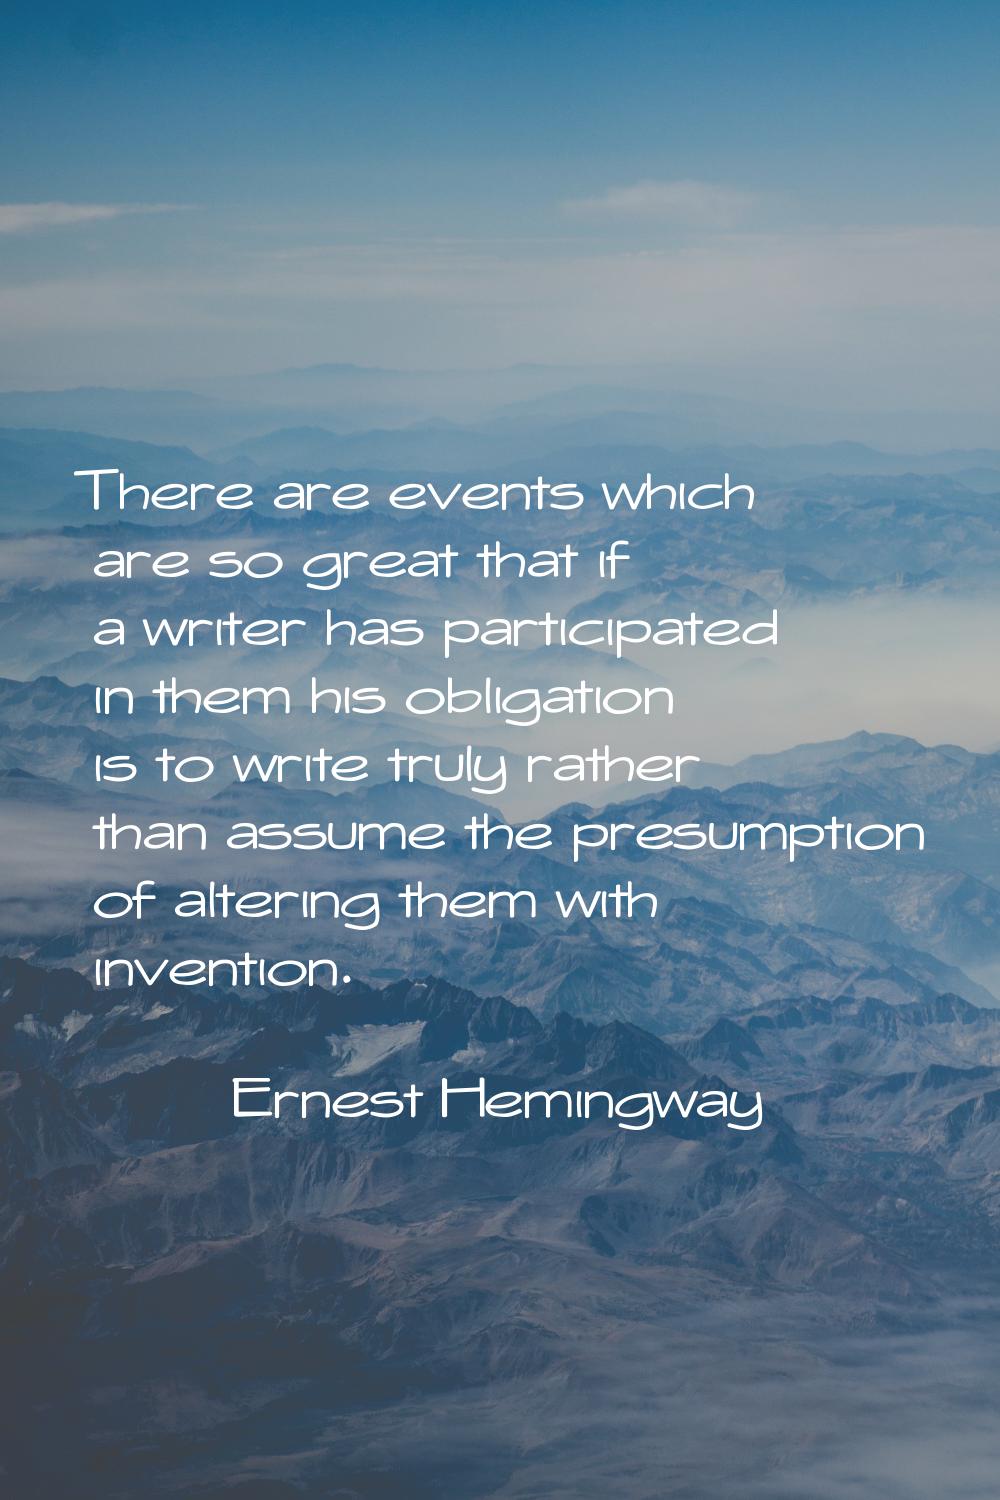 There are events which are so great that if a writer has participated in them his obligation is to 